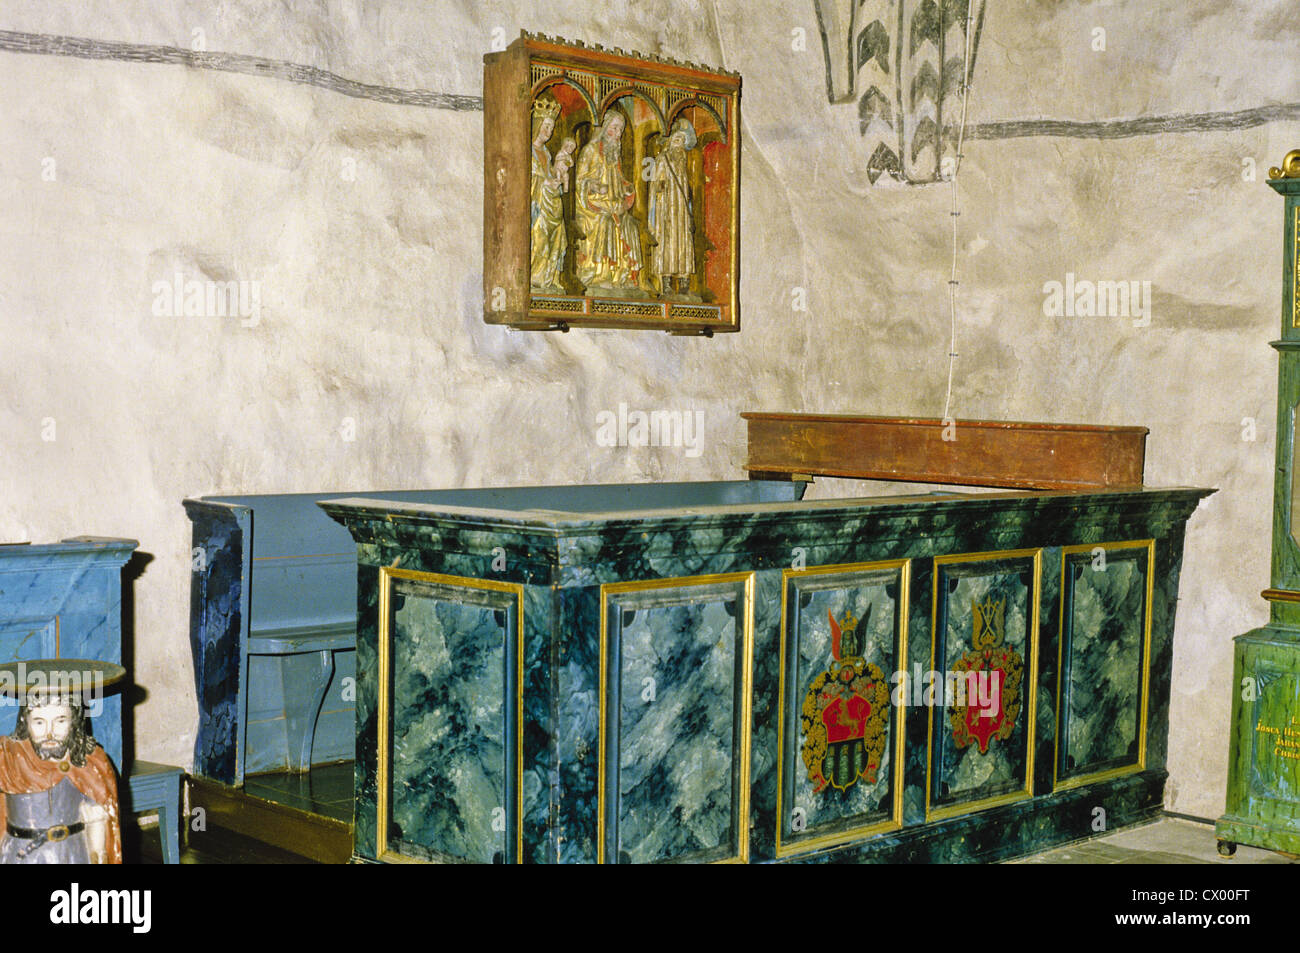 Seating furniture and a triptych with three carved statues in the 15th century church at Rymattyla, Finland Stock Photo